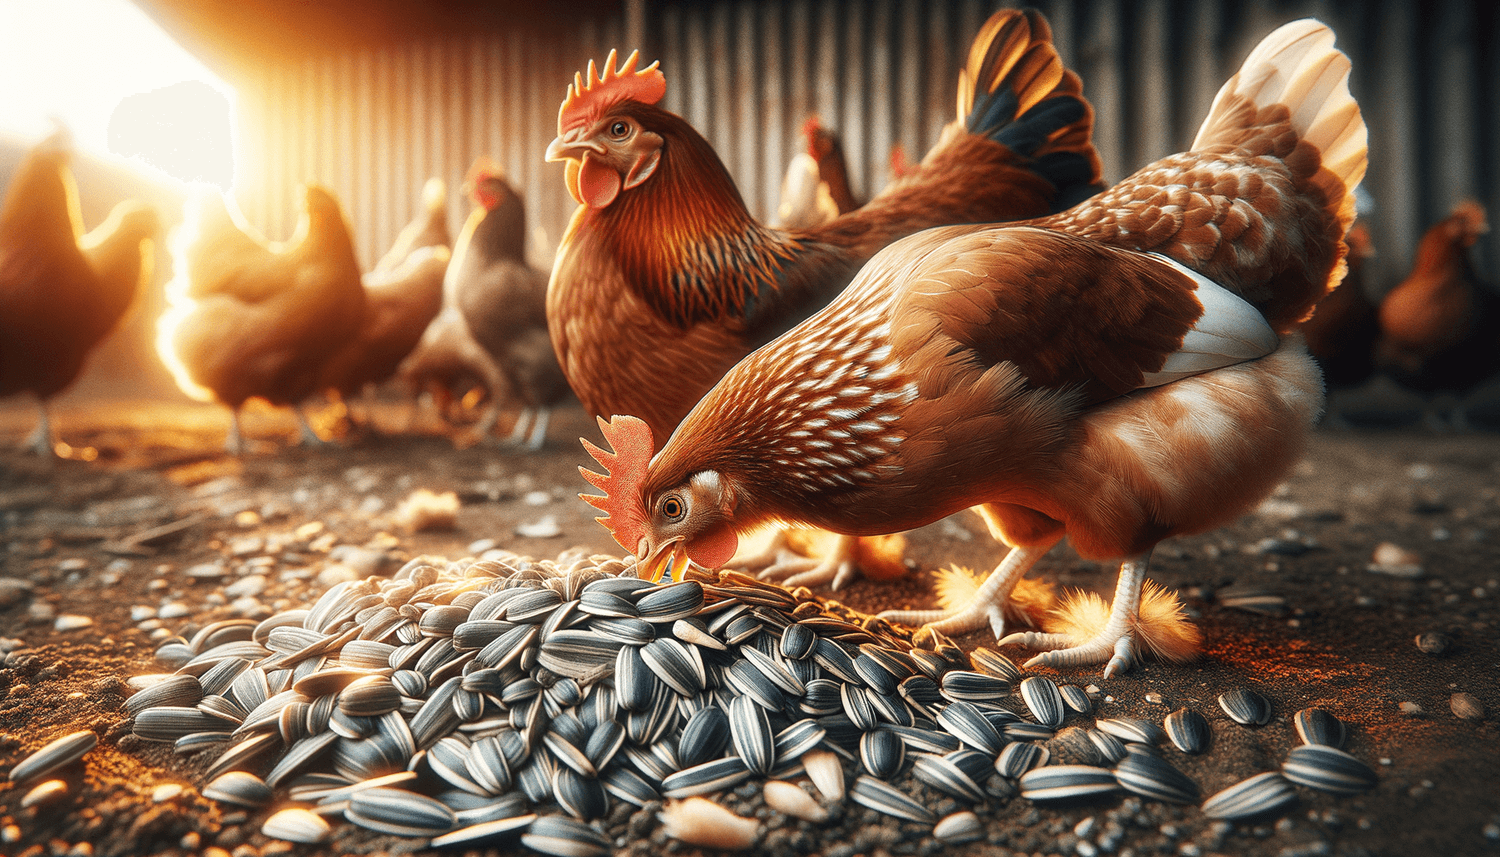 Can Chickens Eat Raw Sunflower Seeds?